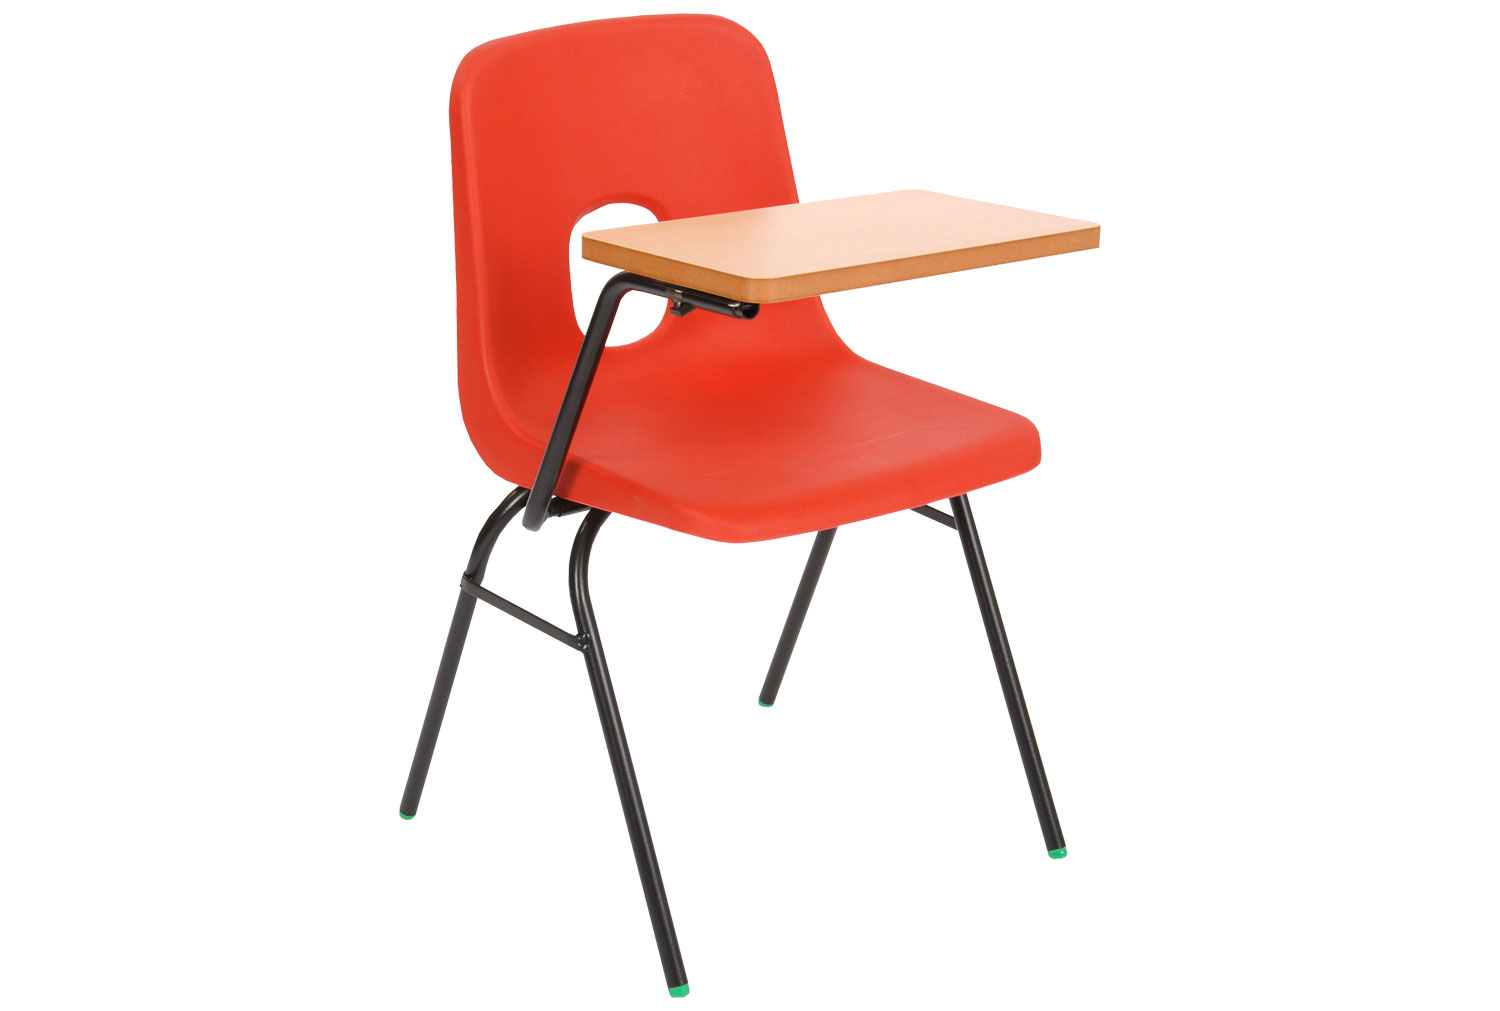 Qty 8 - Hille E Series Classroom Chair With Writing Tablet, 14+ Years - 41wx37dx46h (cm), Black Frame, Black Top